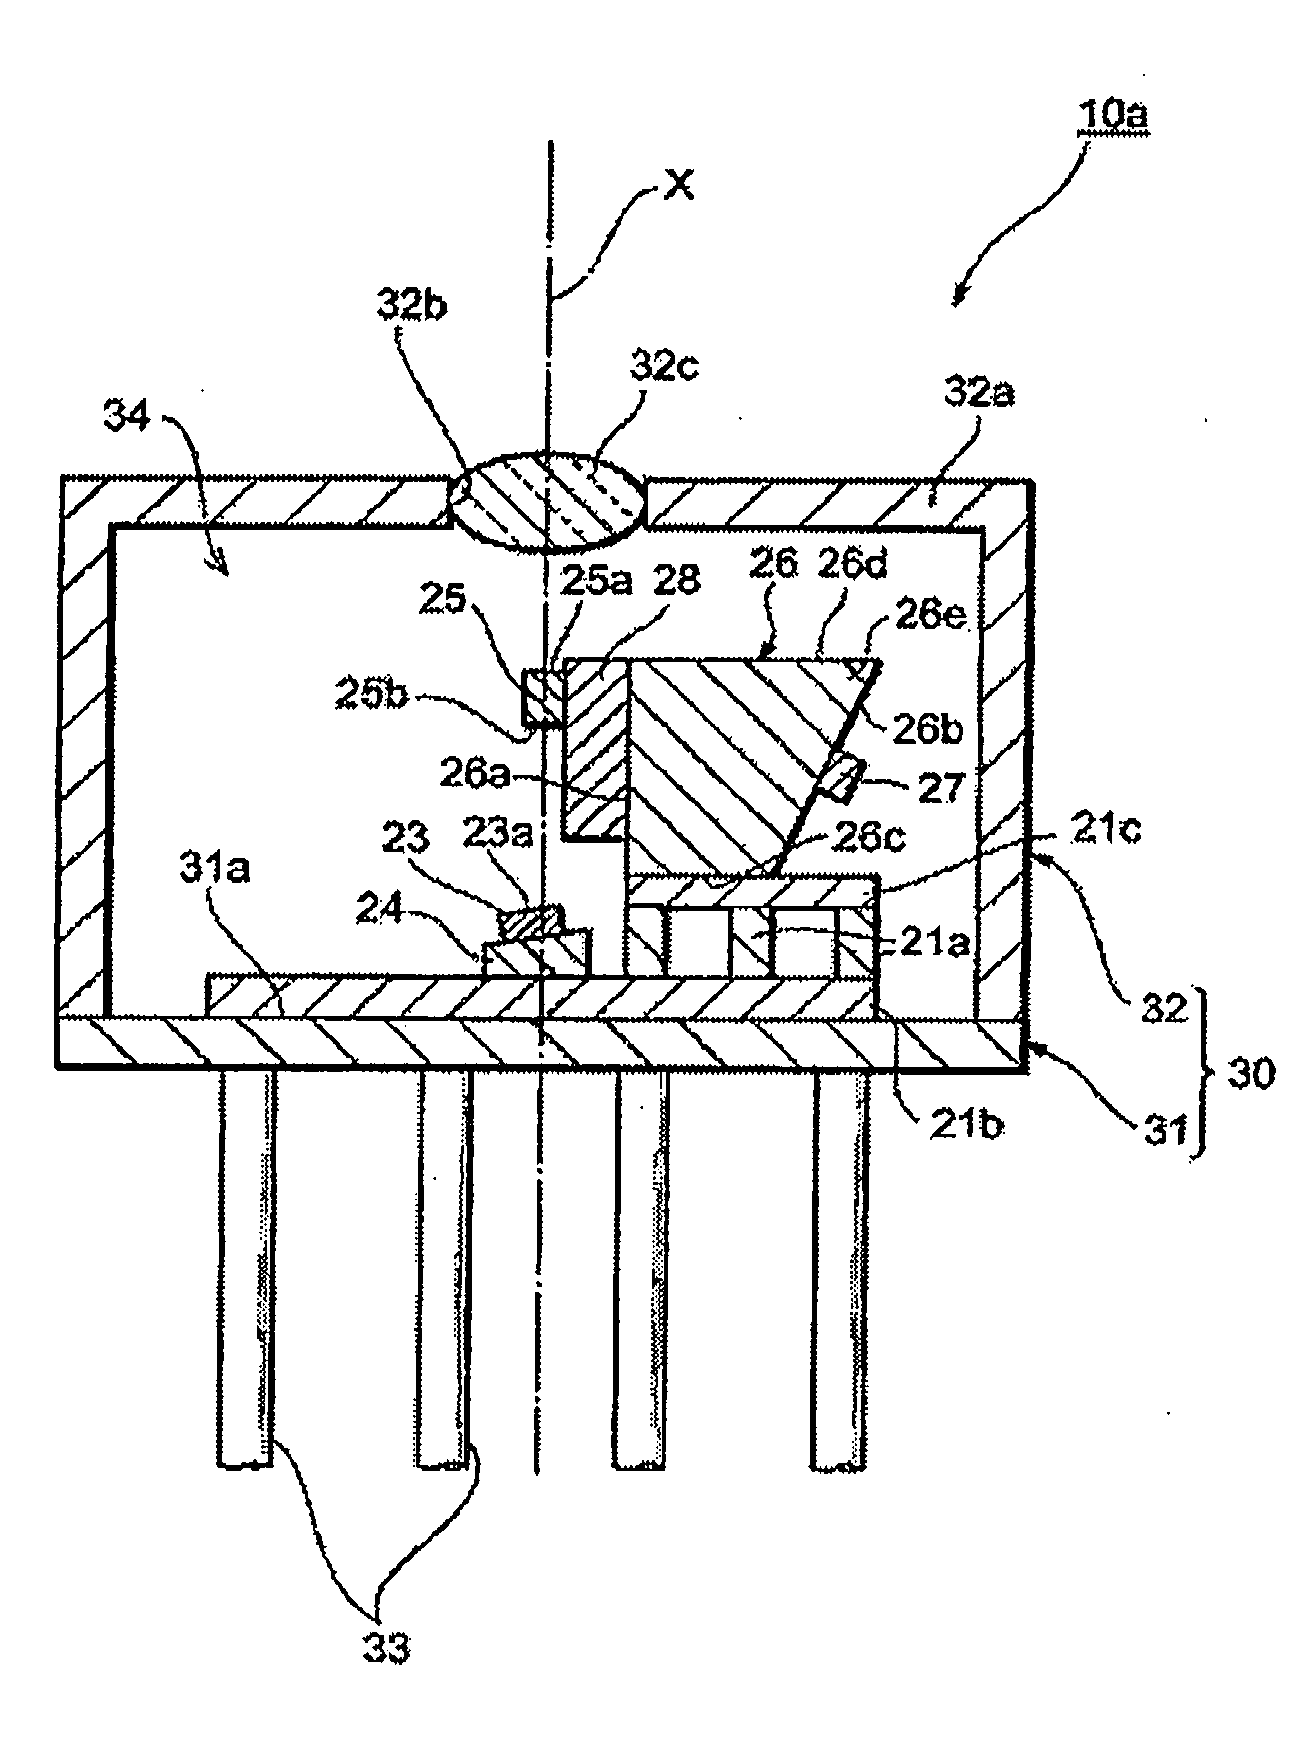 Light-emitting module installing thermo-electric controller